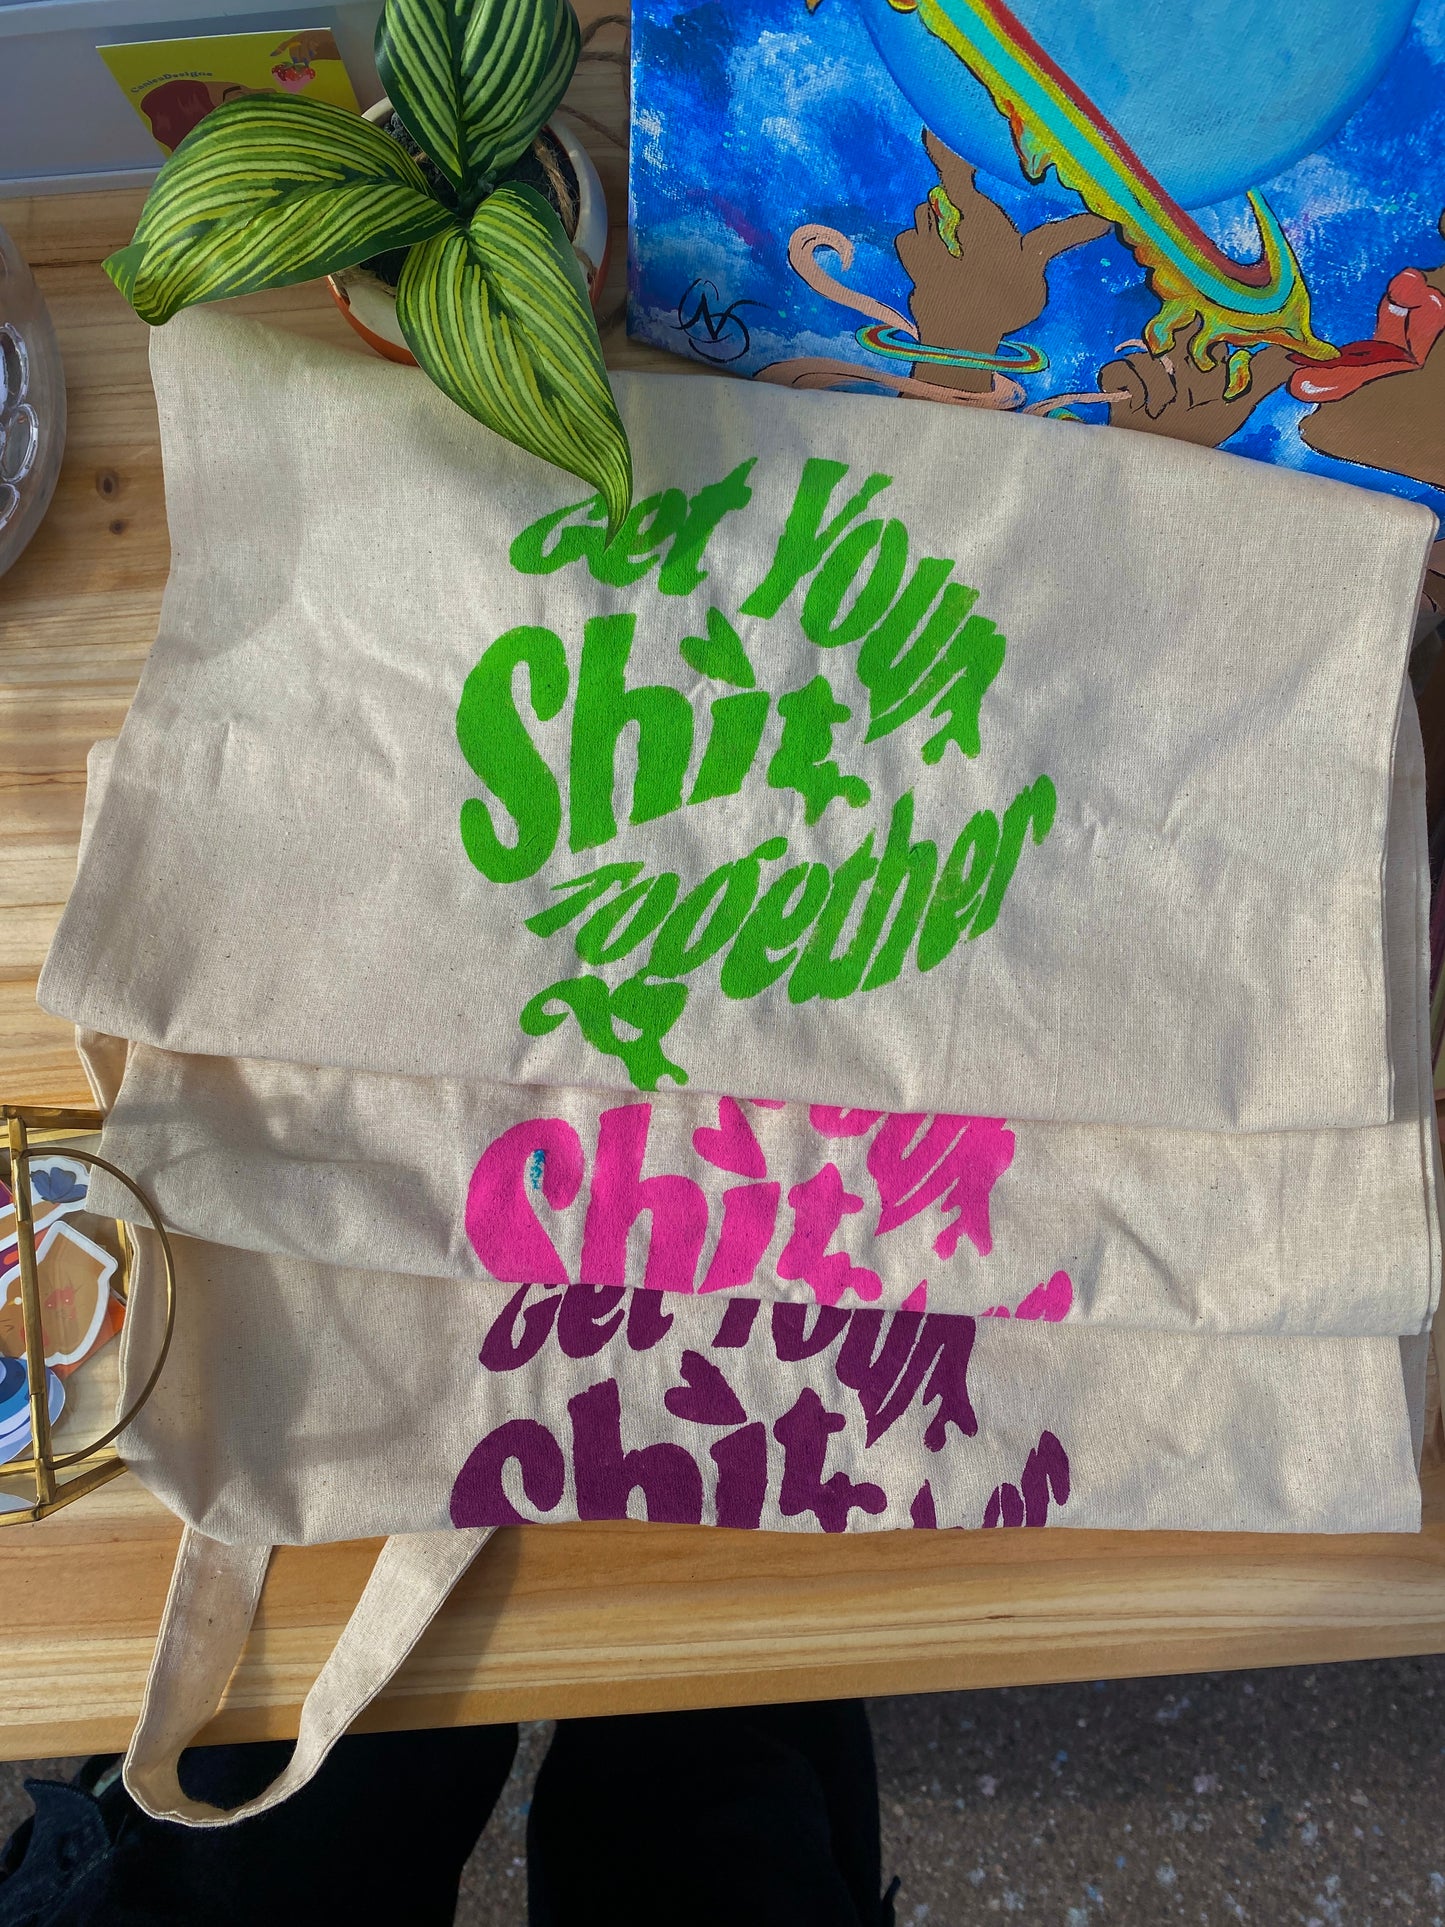 Get your sh!t together tote 2